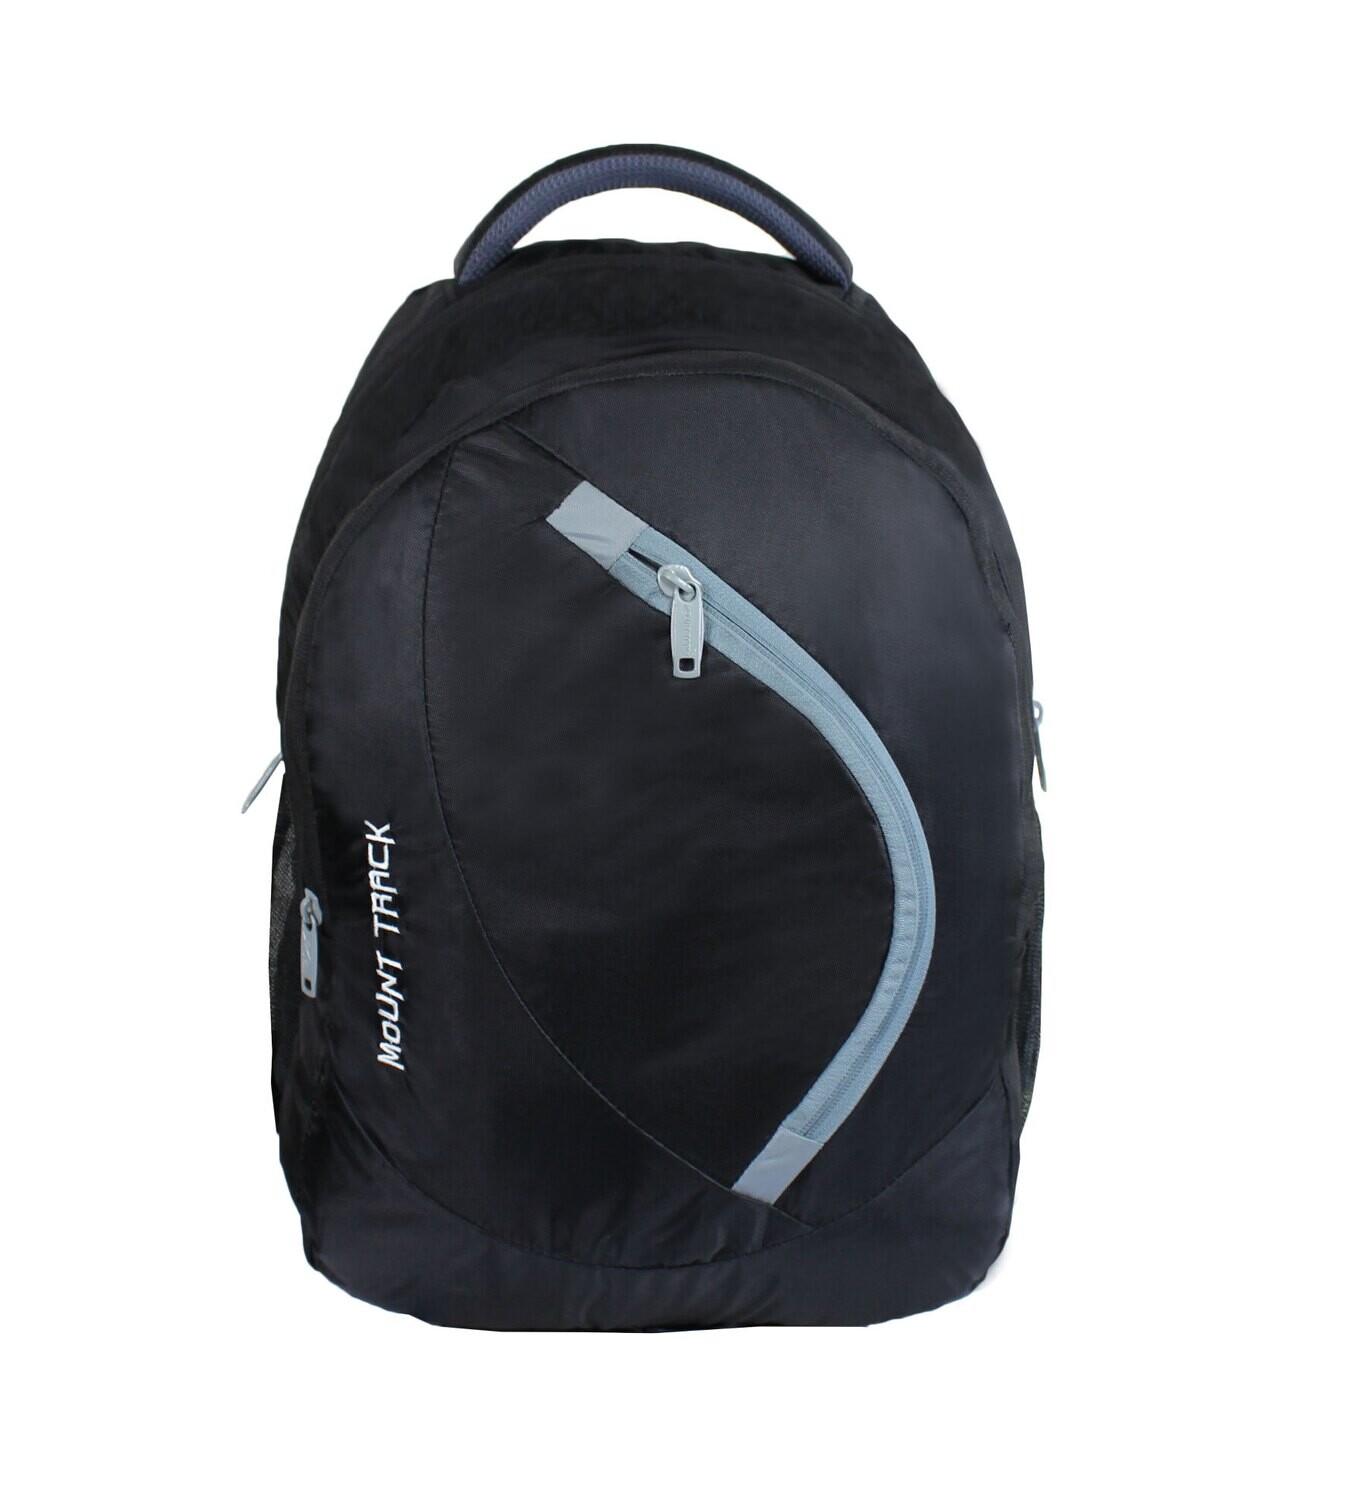 Gear up 30 L Laptop Backpack